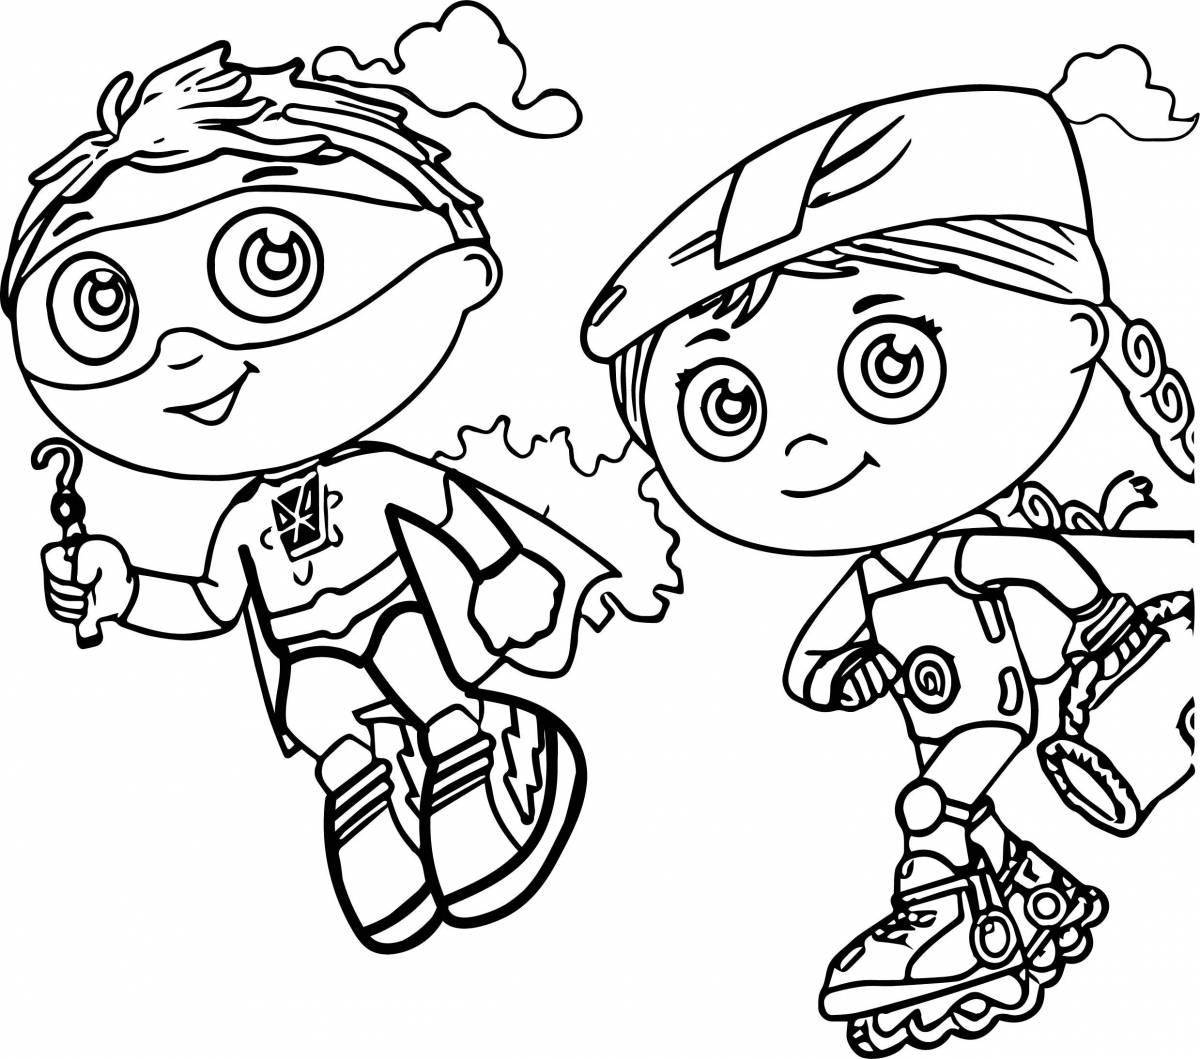 Tom chase's dazzling heroes coloring page